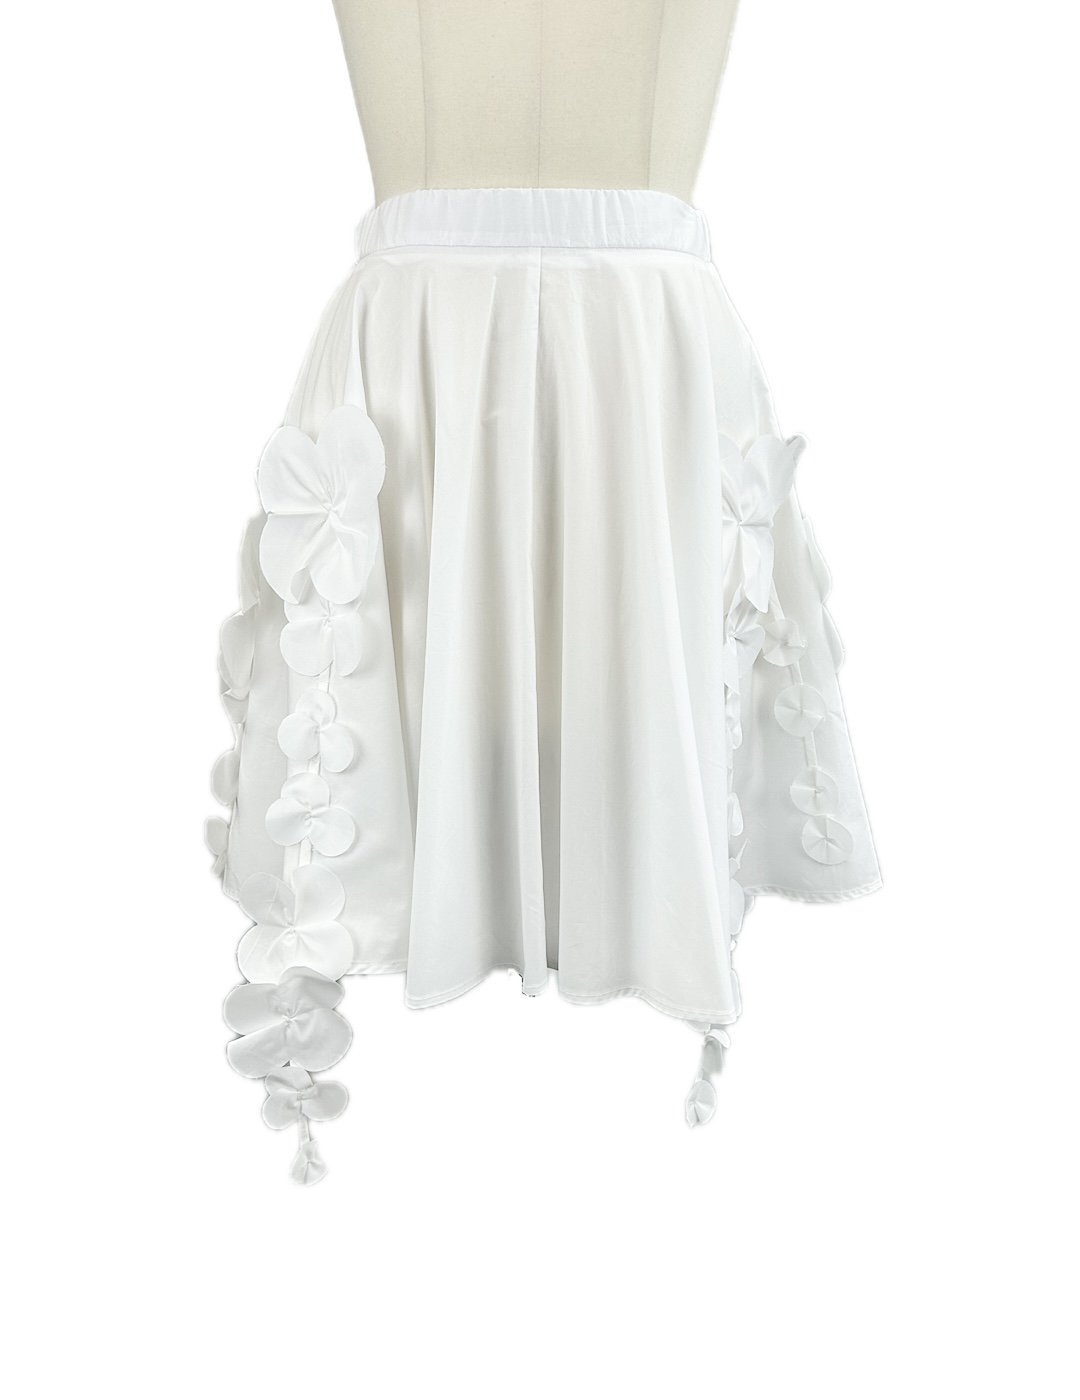 <img class='new_mark_img1' src='https://img.shop-pro.jp/img/new/icons47.gif' style='border:none;display:inline;margin:0px;padding:0px;width:auto;' />30offMEIMEIJ / FLOWER CUTTING SKIRT